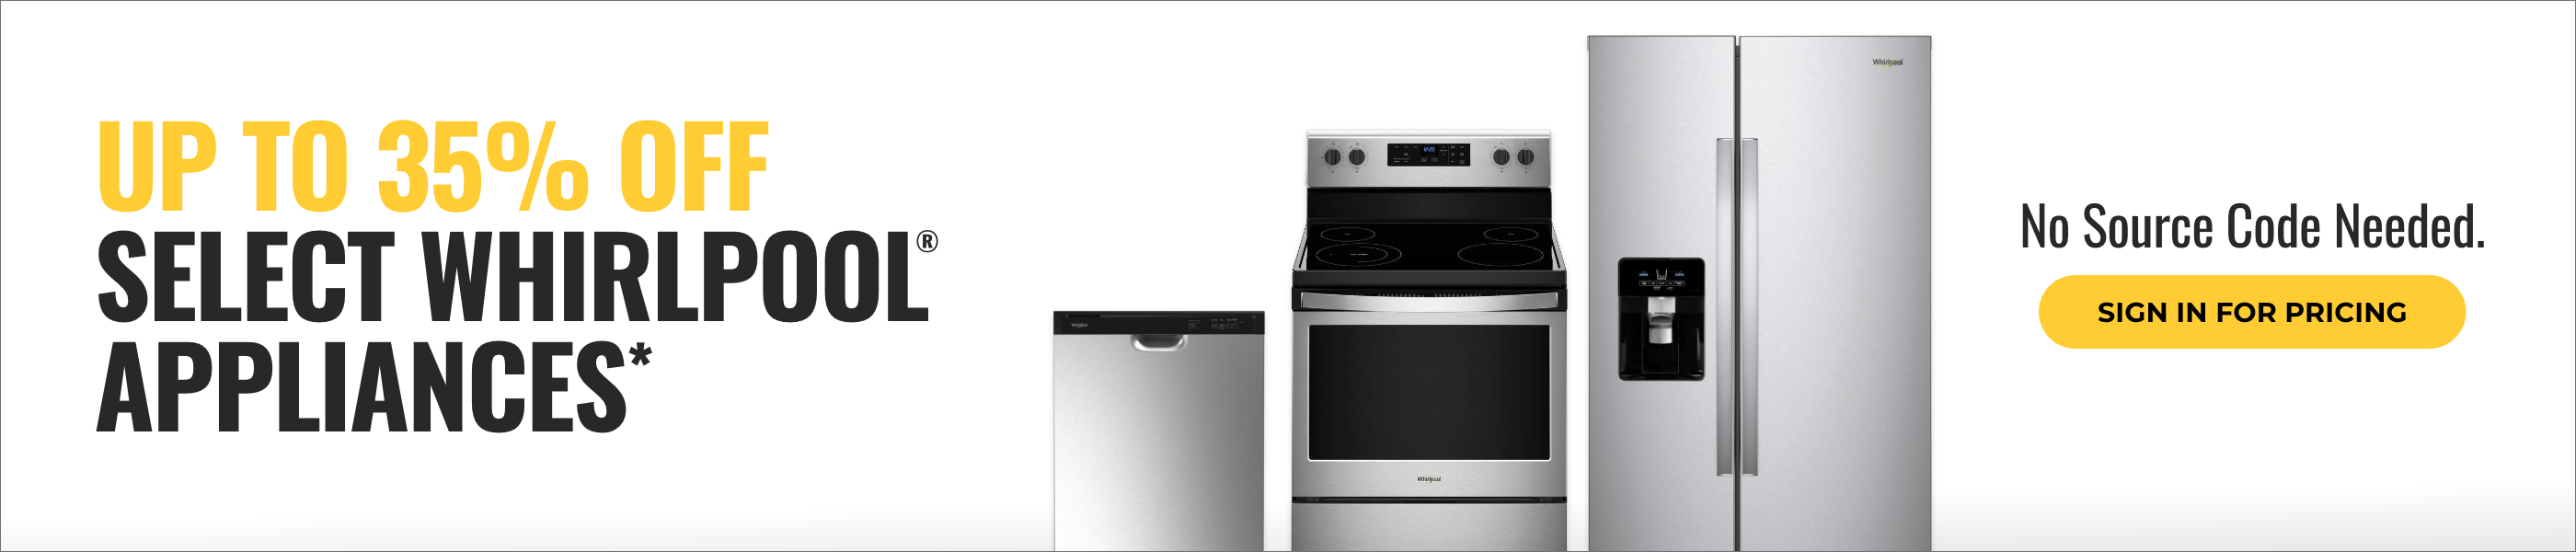 Up To 35% Off Select Appliances